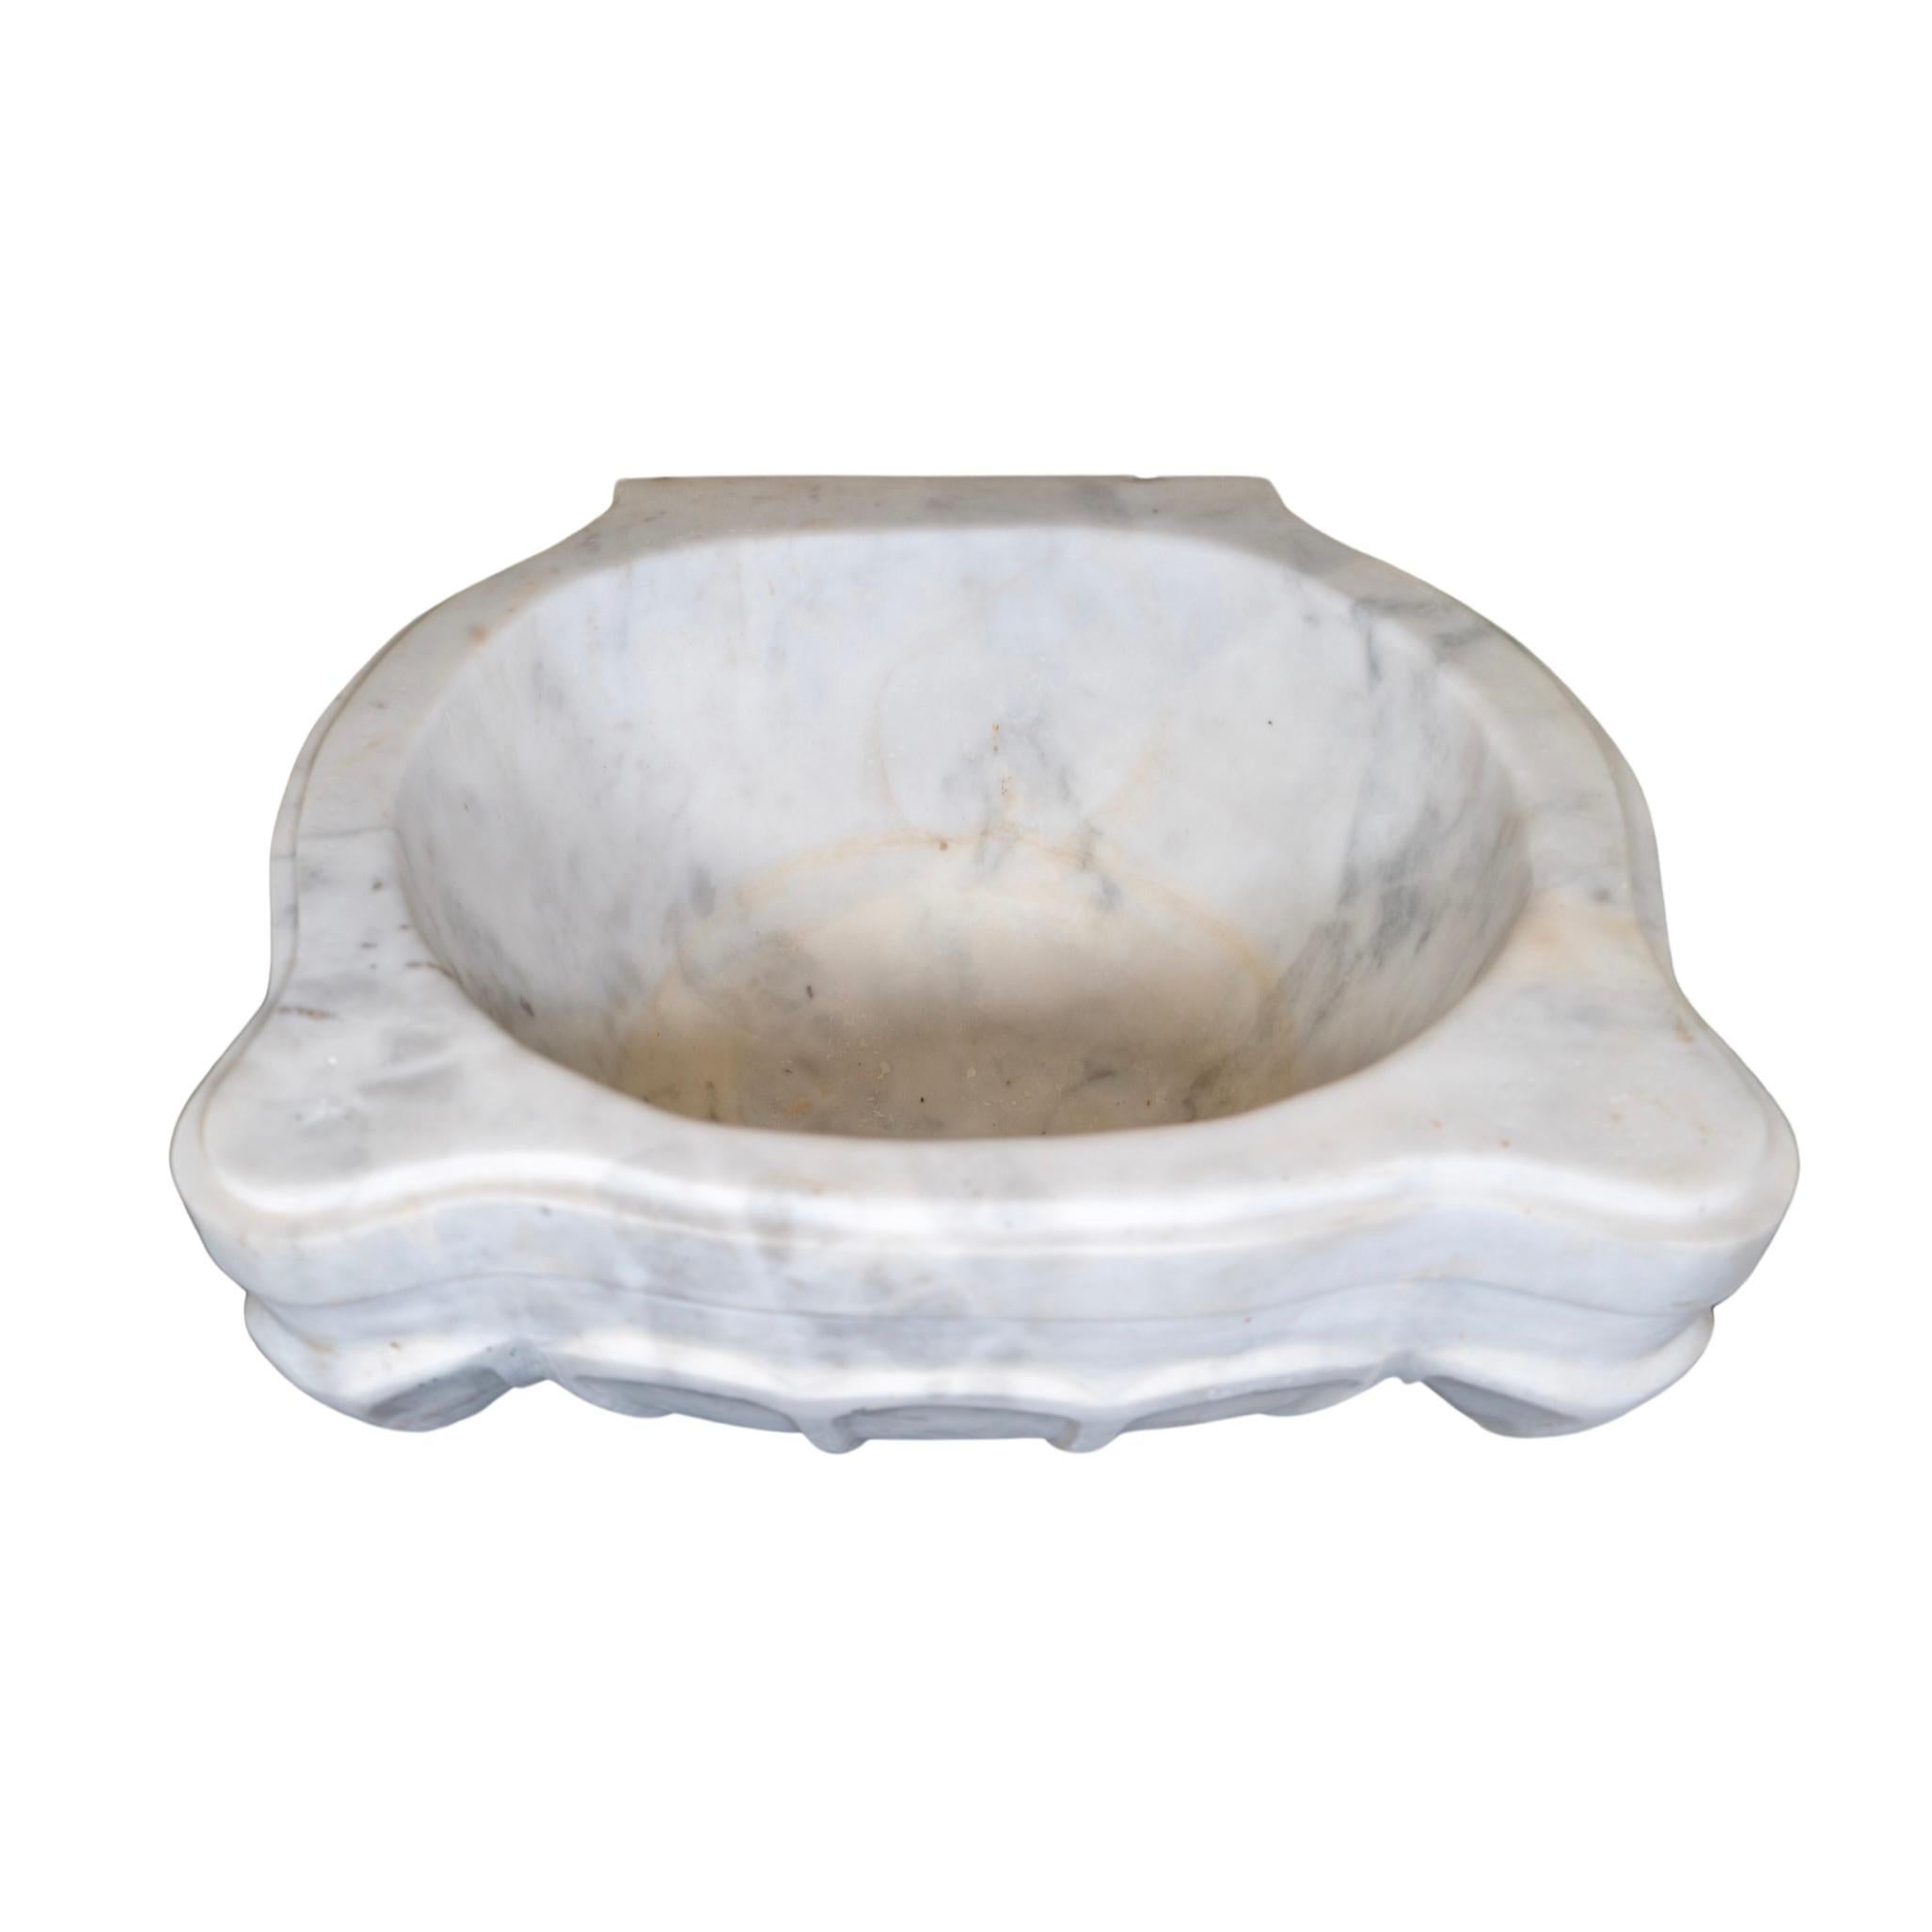 French White Marble Sink In Good Condition For Sale In Dallas, TX